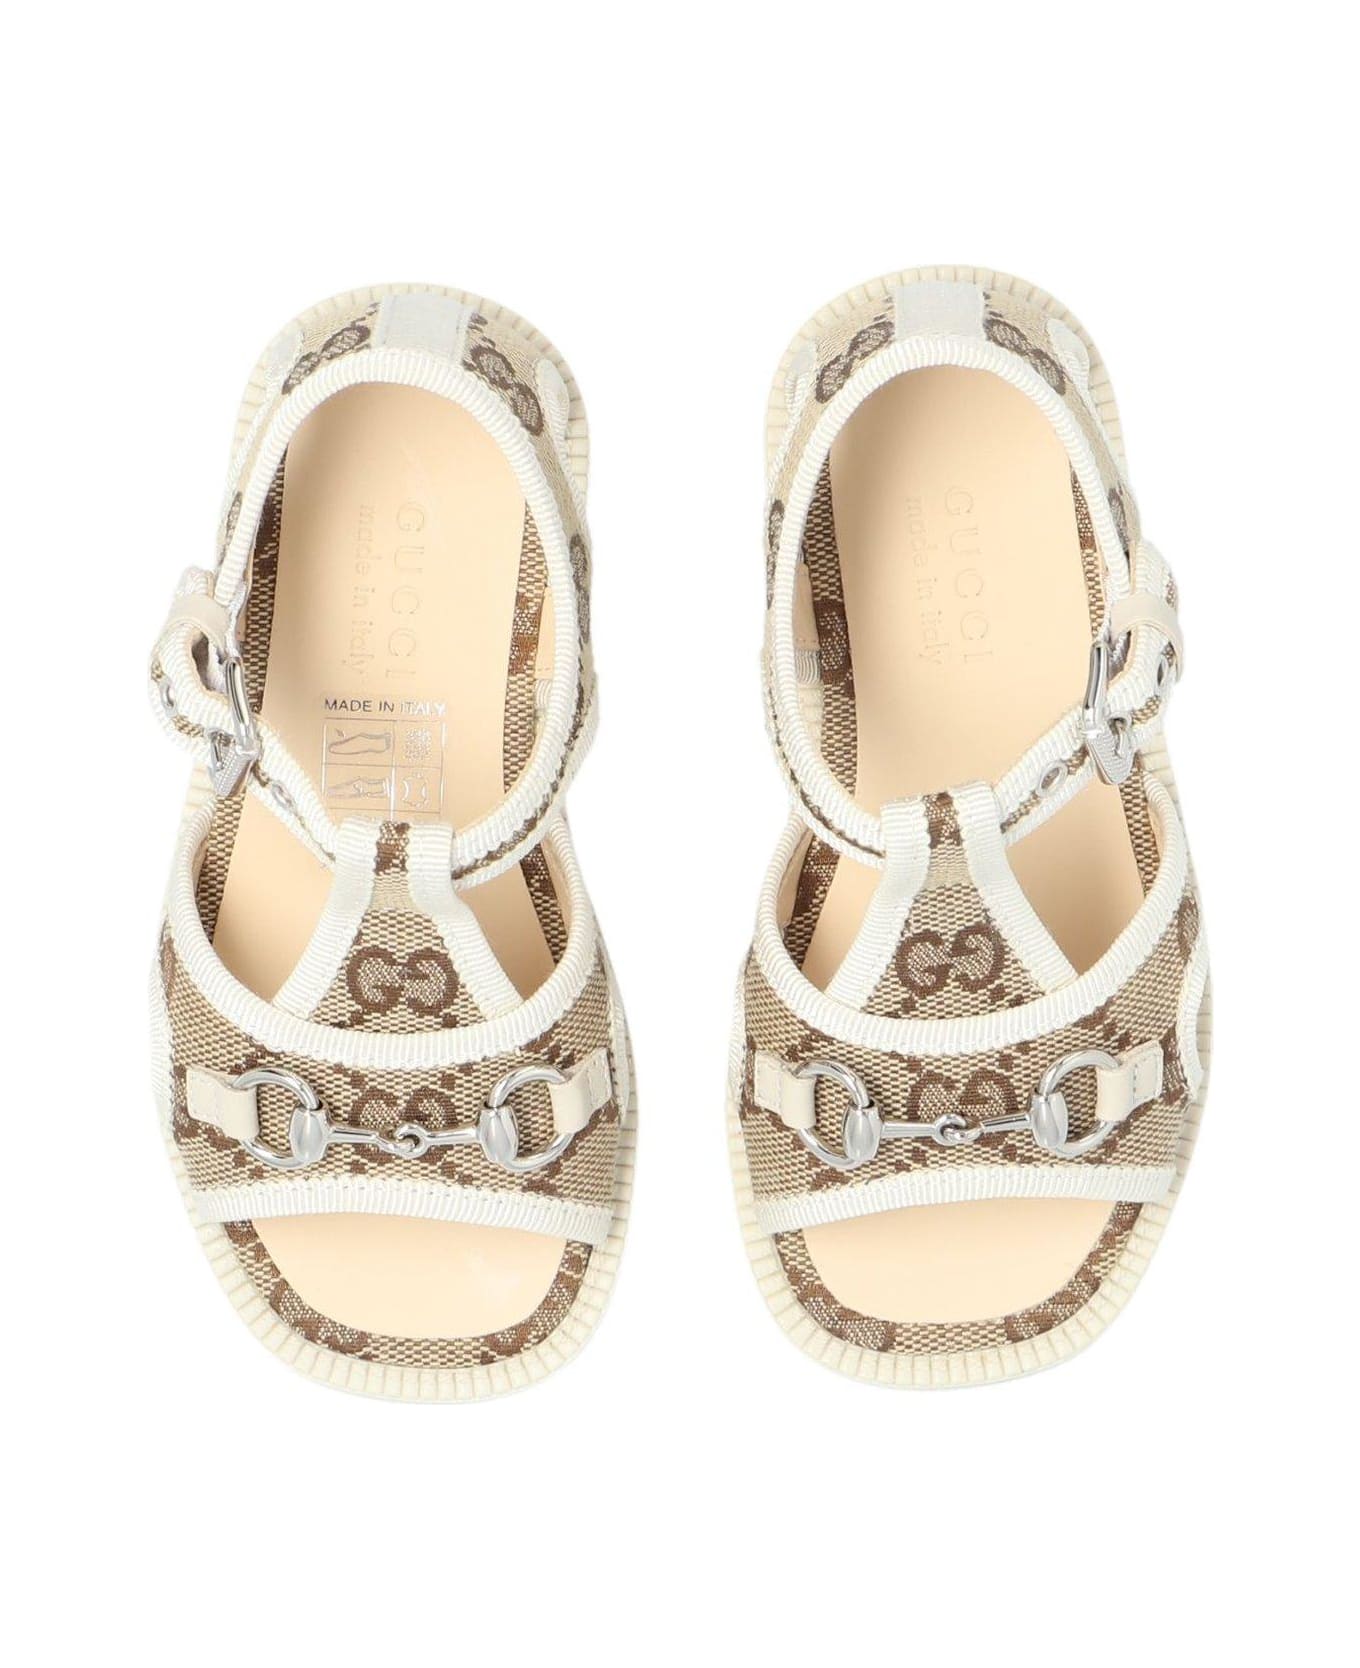 Gucci Buckled Open Toe Sandals - White